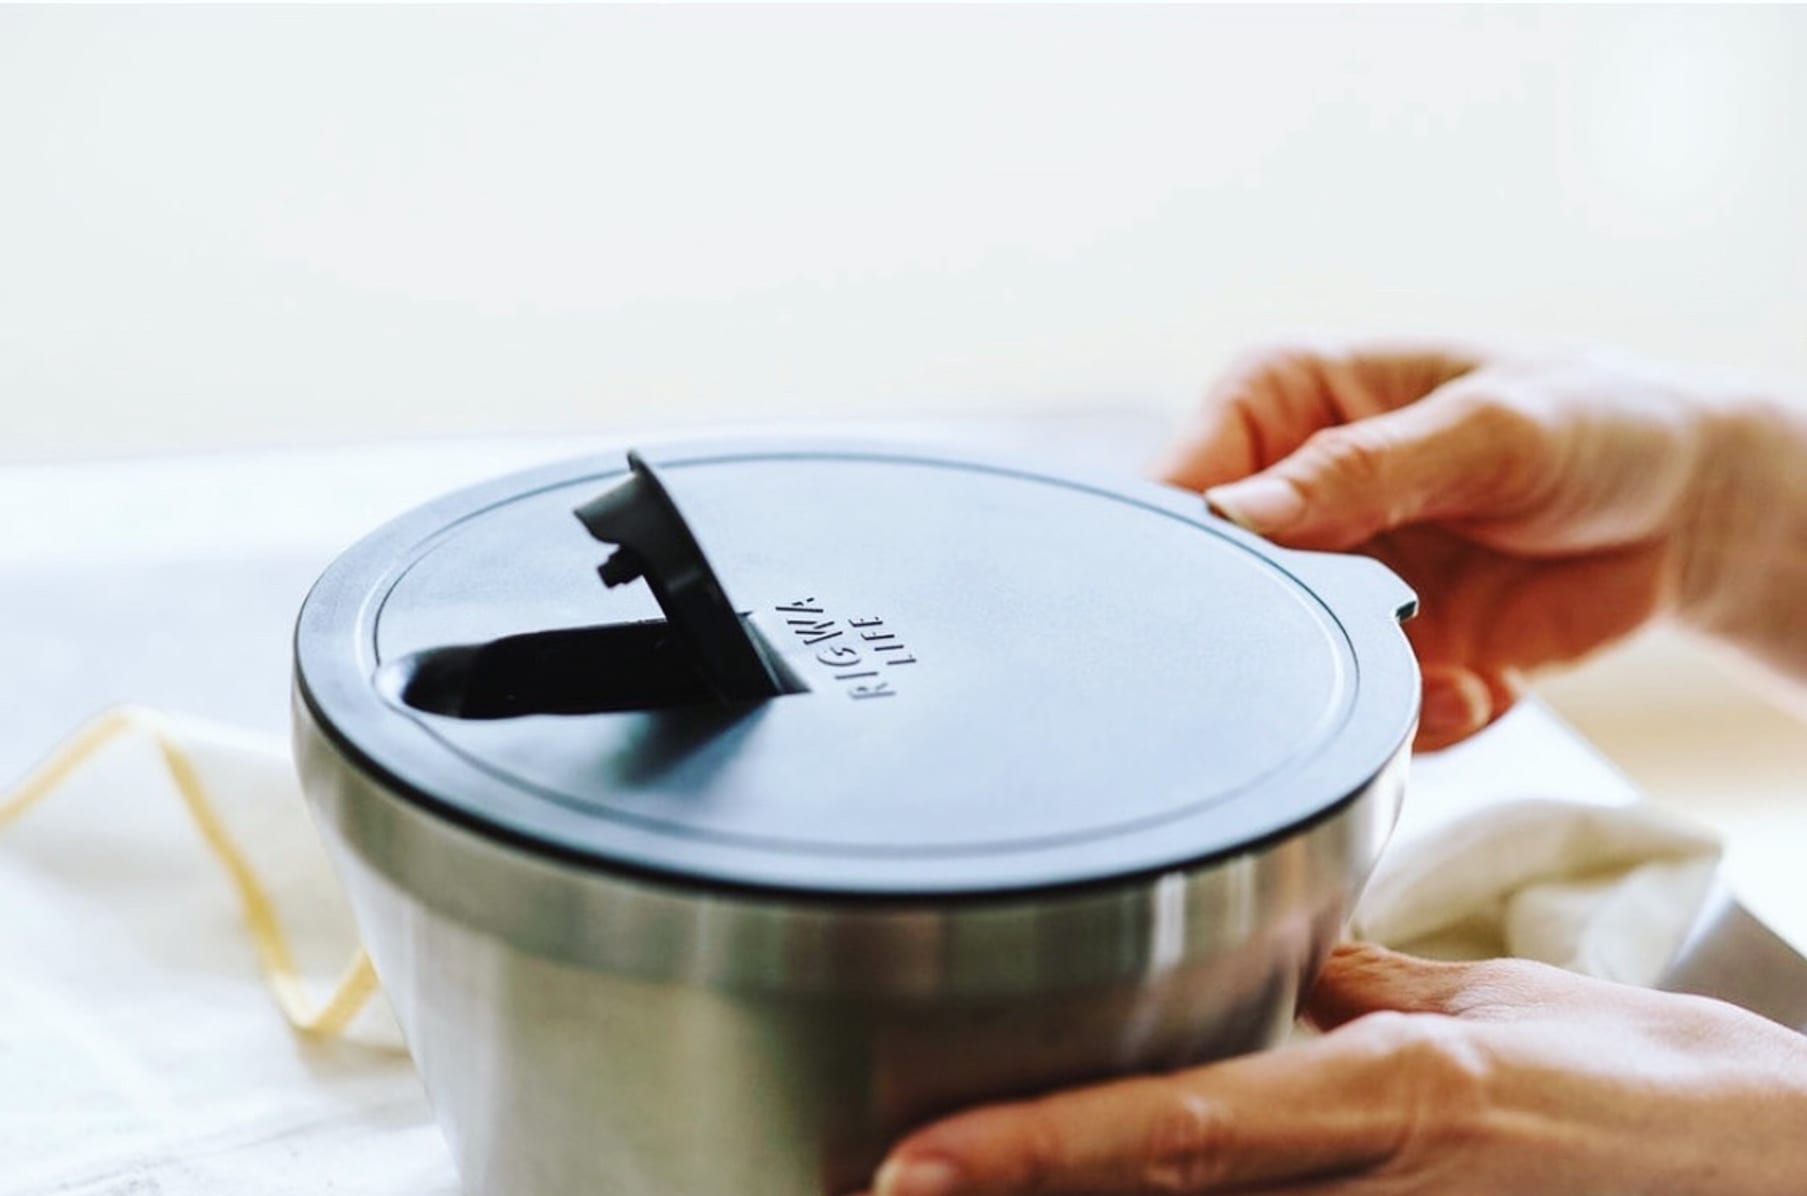  RIGWA Stainless Steel Insulated Food Container : Home & Kitchen